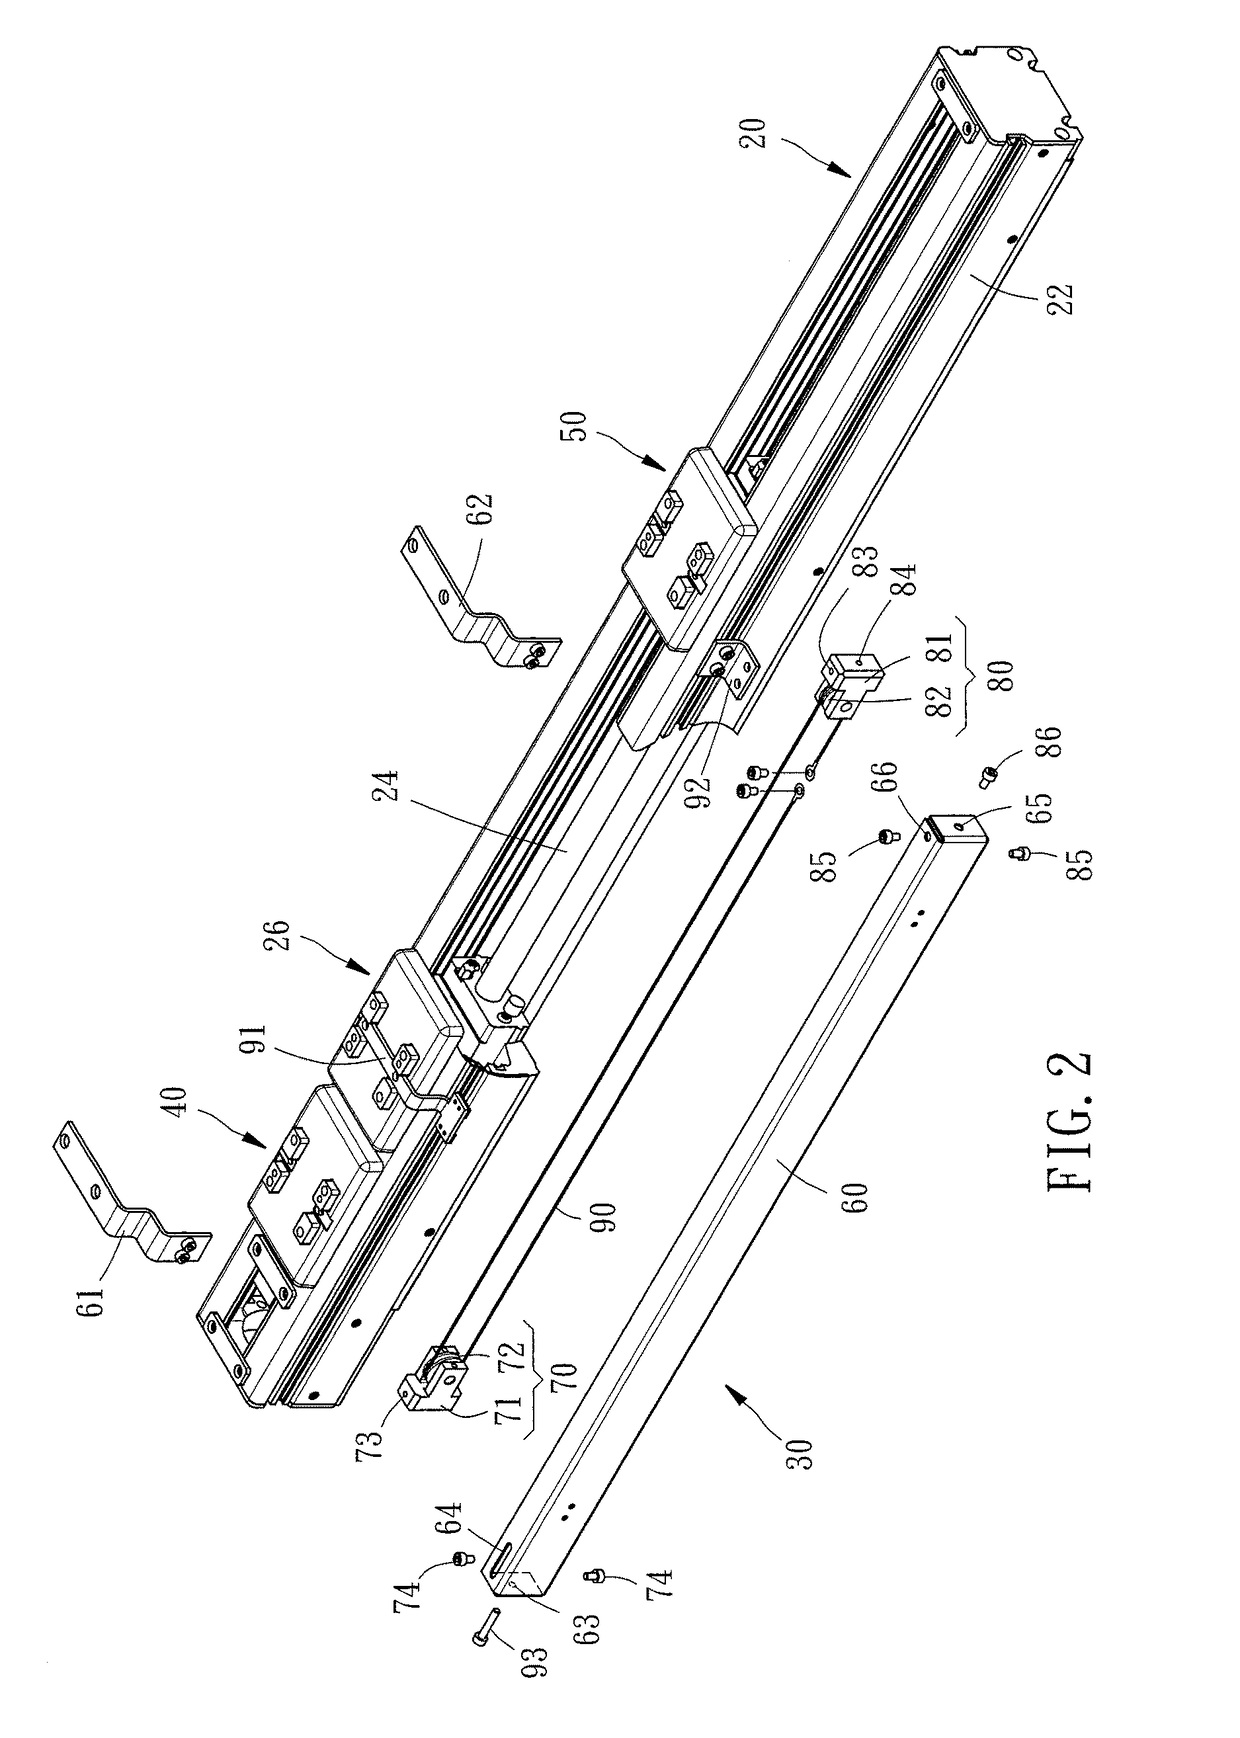 Linear actuator with a modular support device